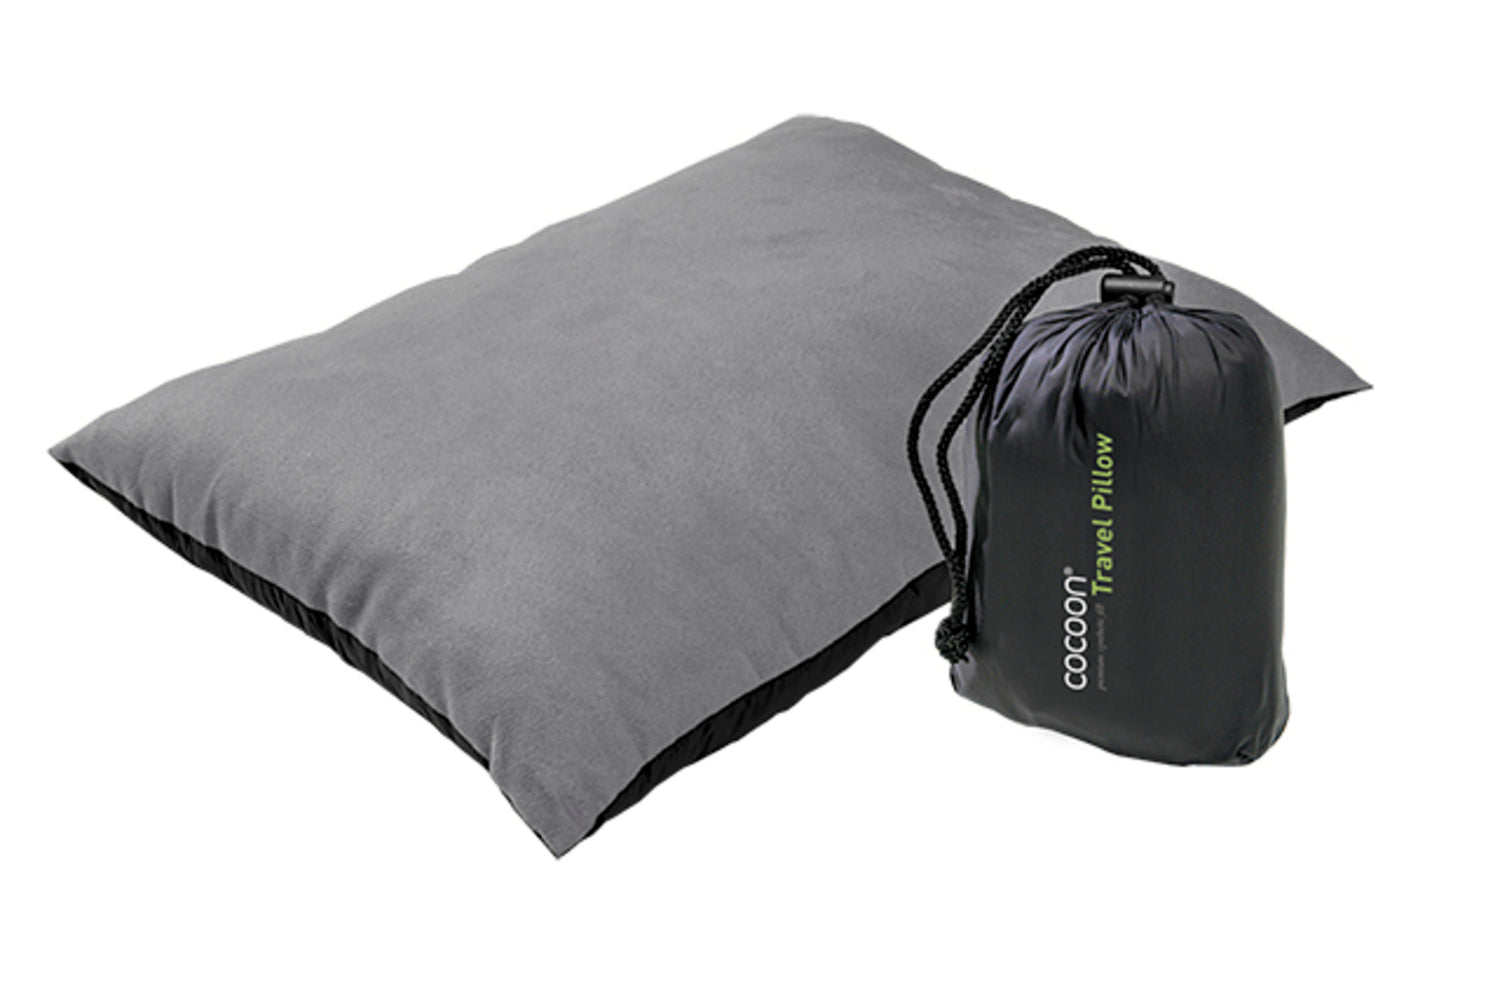 Cocoon Synthetic Pillow S charcoal/smoke grey